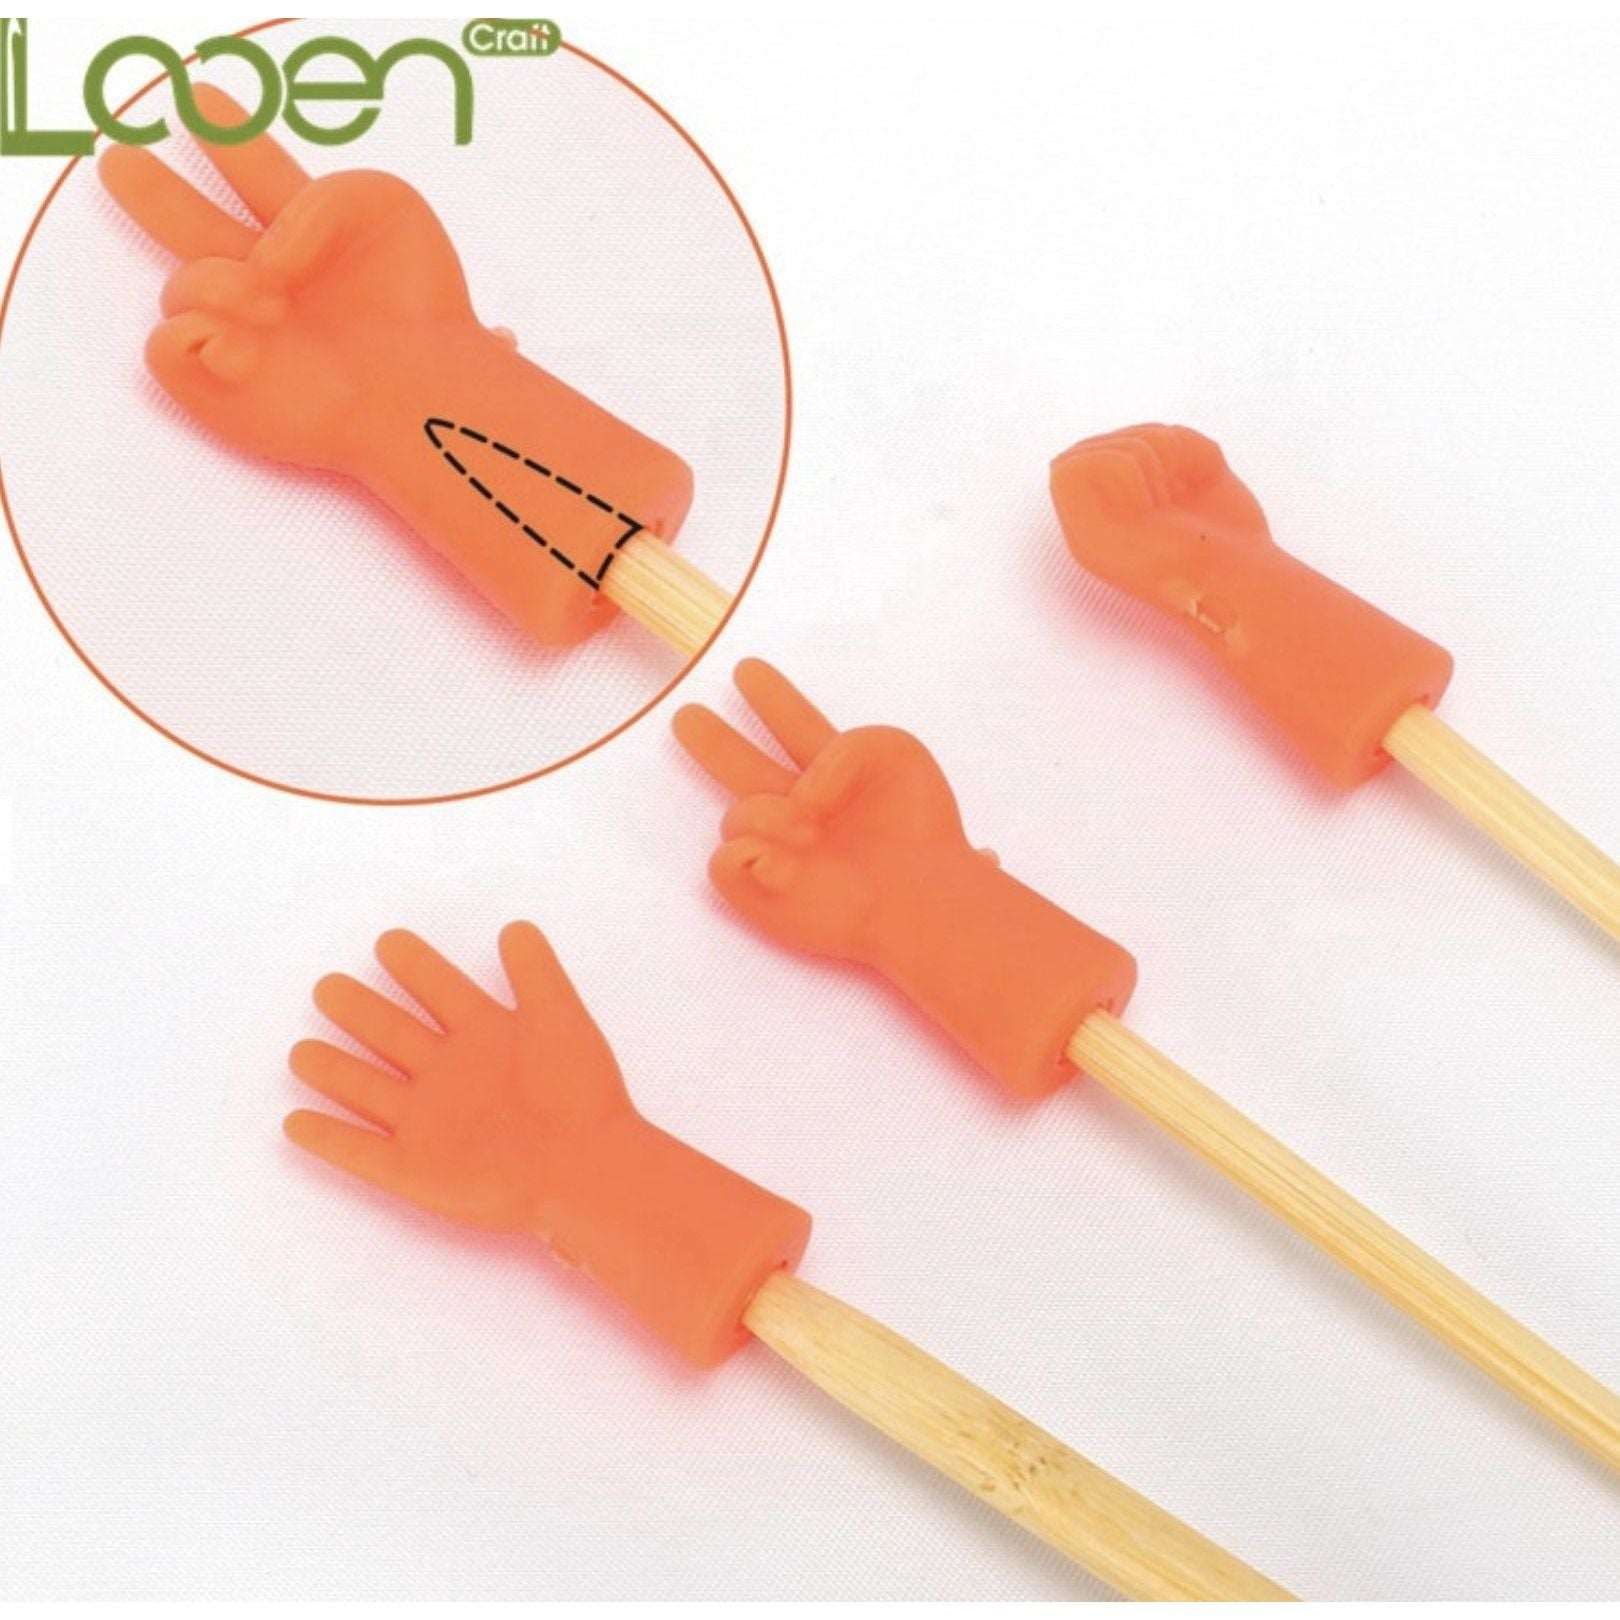 6Pcs Knitting Needles Point Protectors Mix Shaped Needle Tip Stopper Cover - CRAFT2U